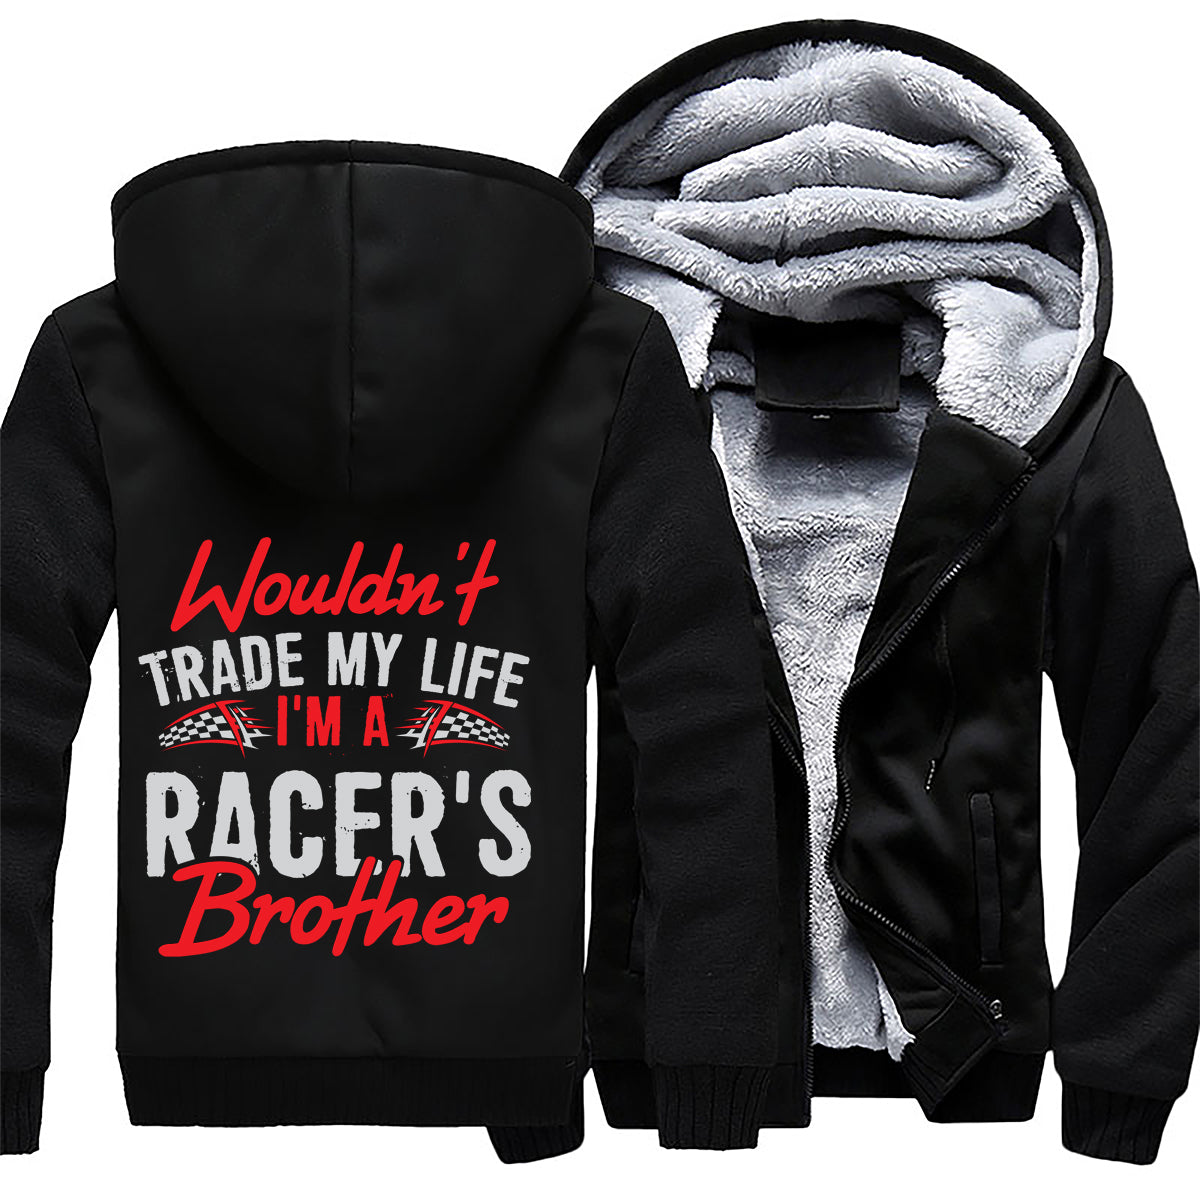 I'm A Racer's Brother Jackets